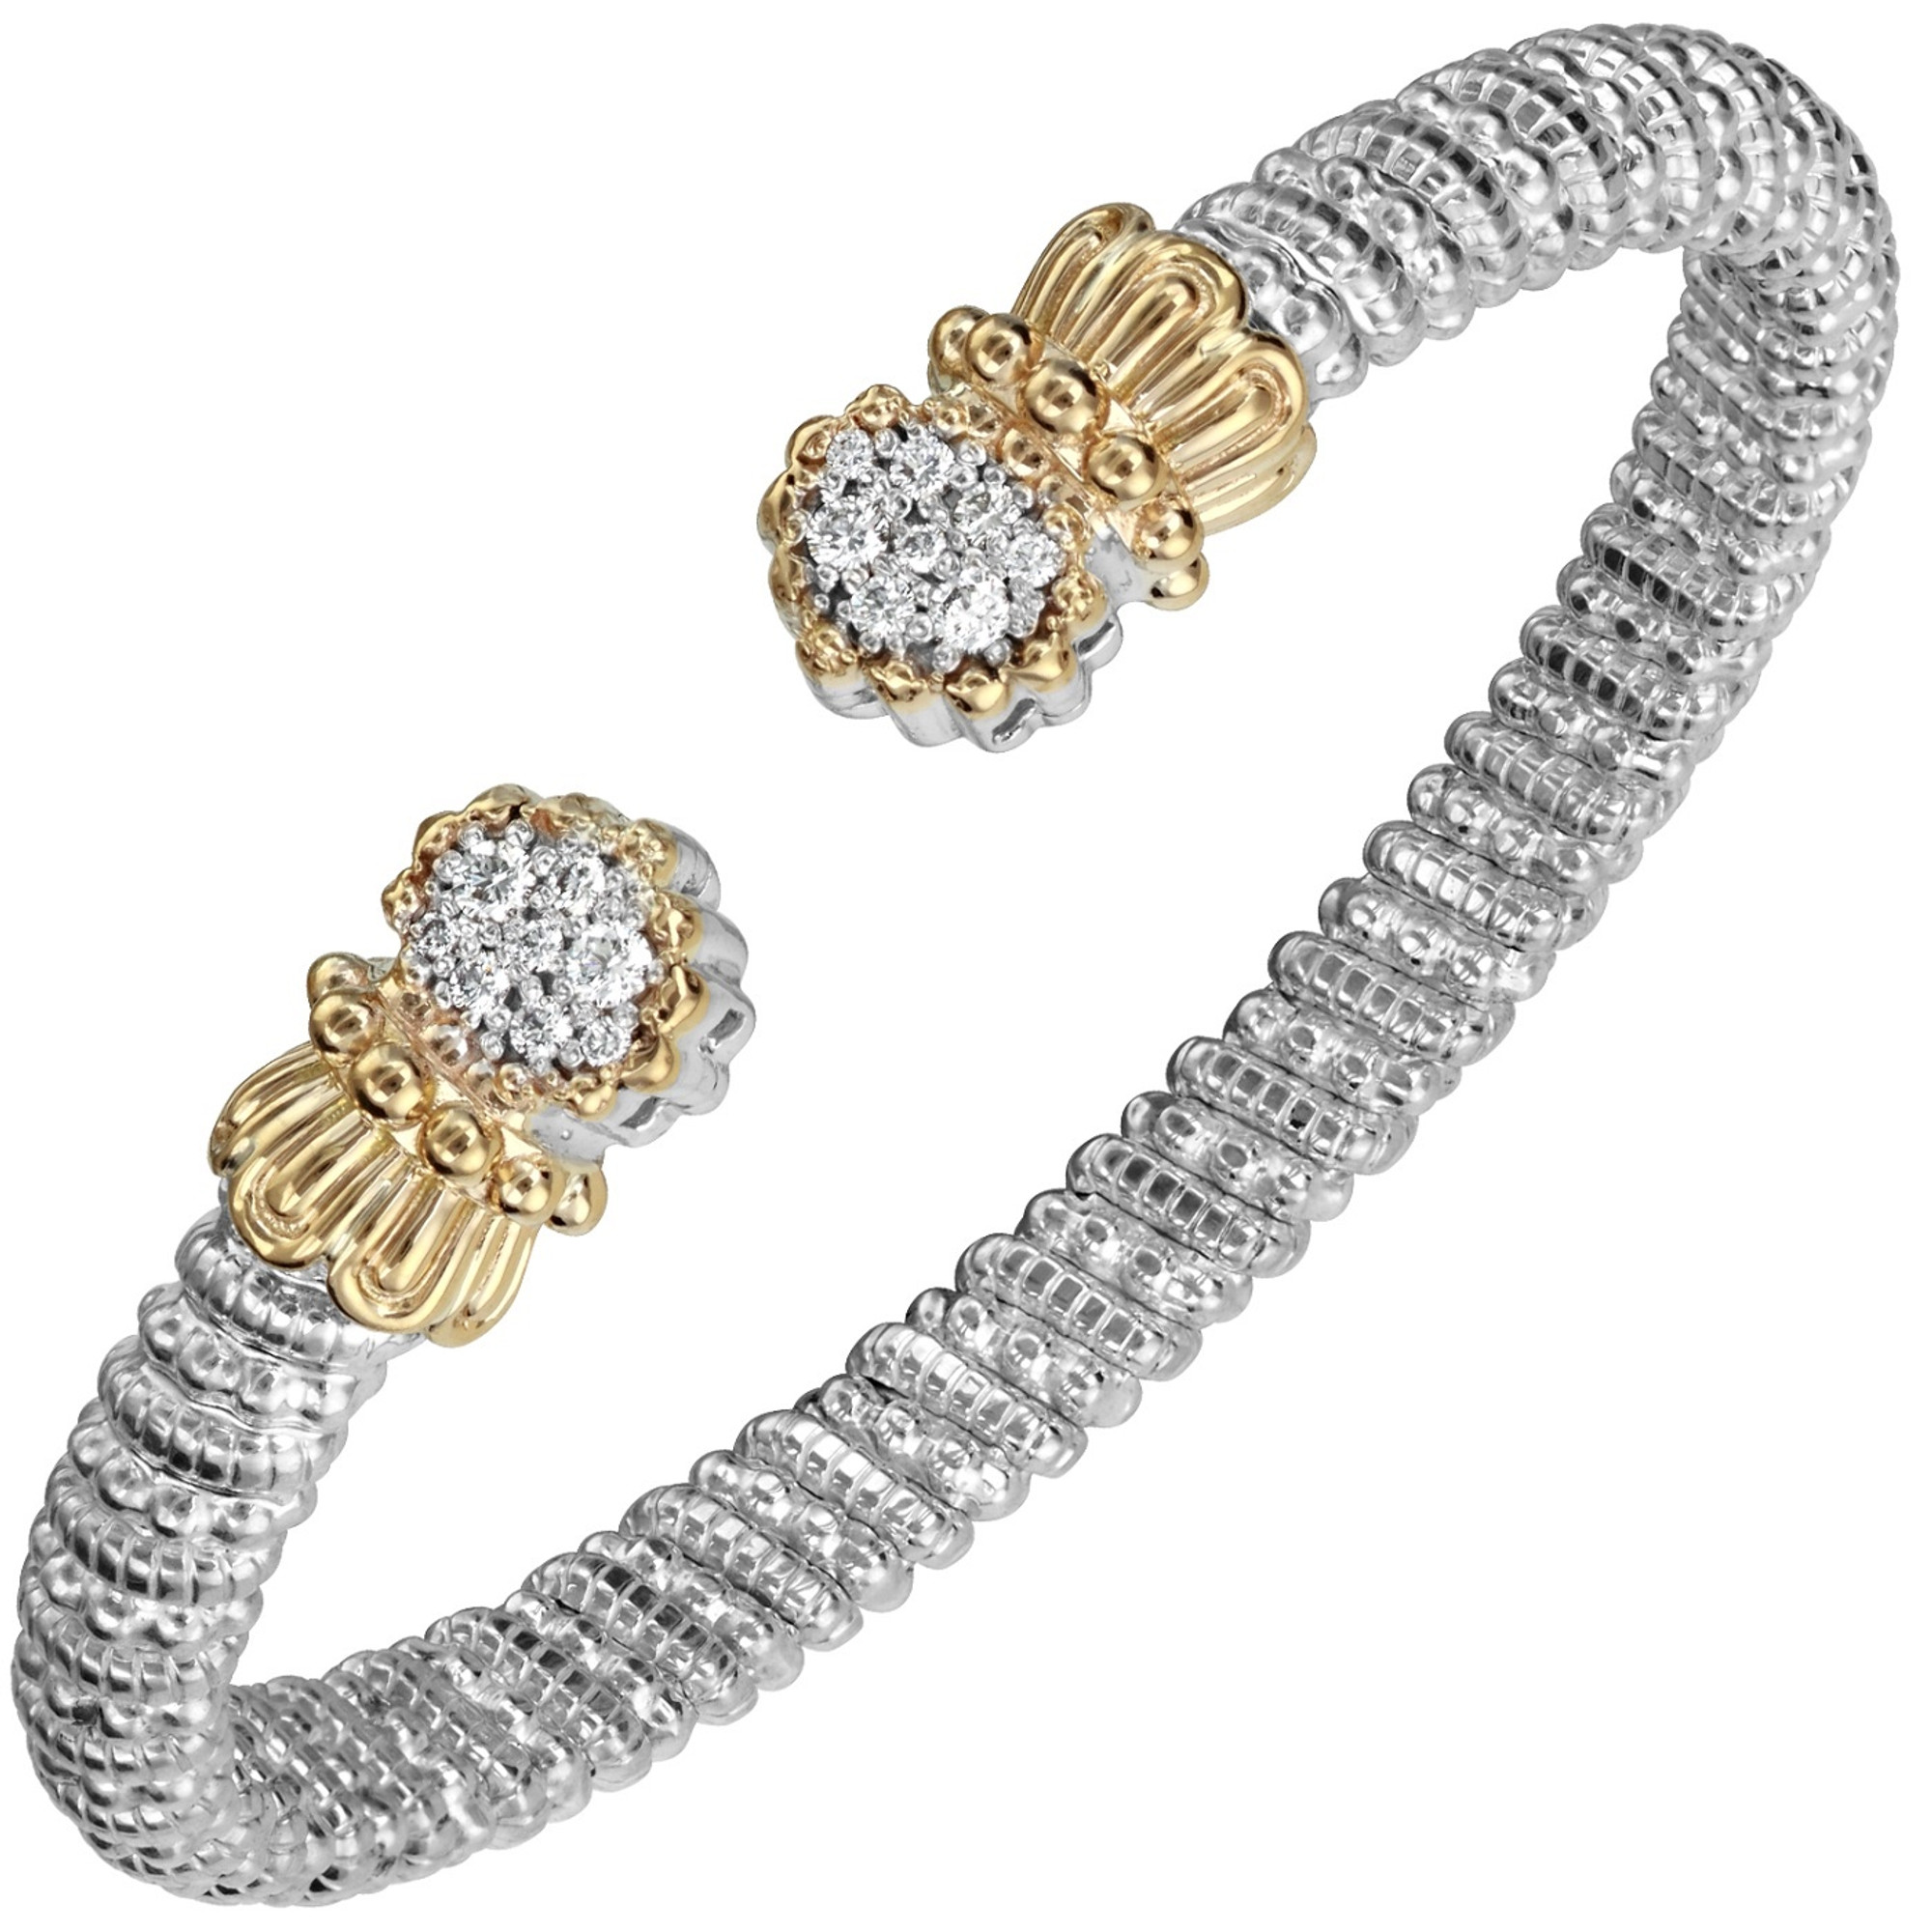 14k Yellow Gold & Sterling Silver, Diamond Multi Pave Bangle by Alwand Vahan